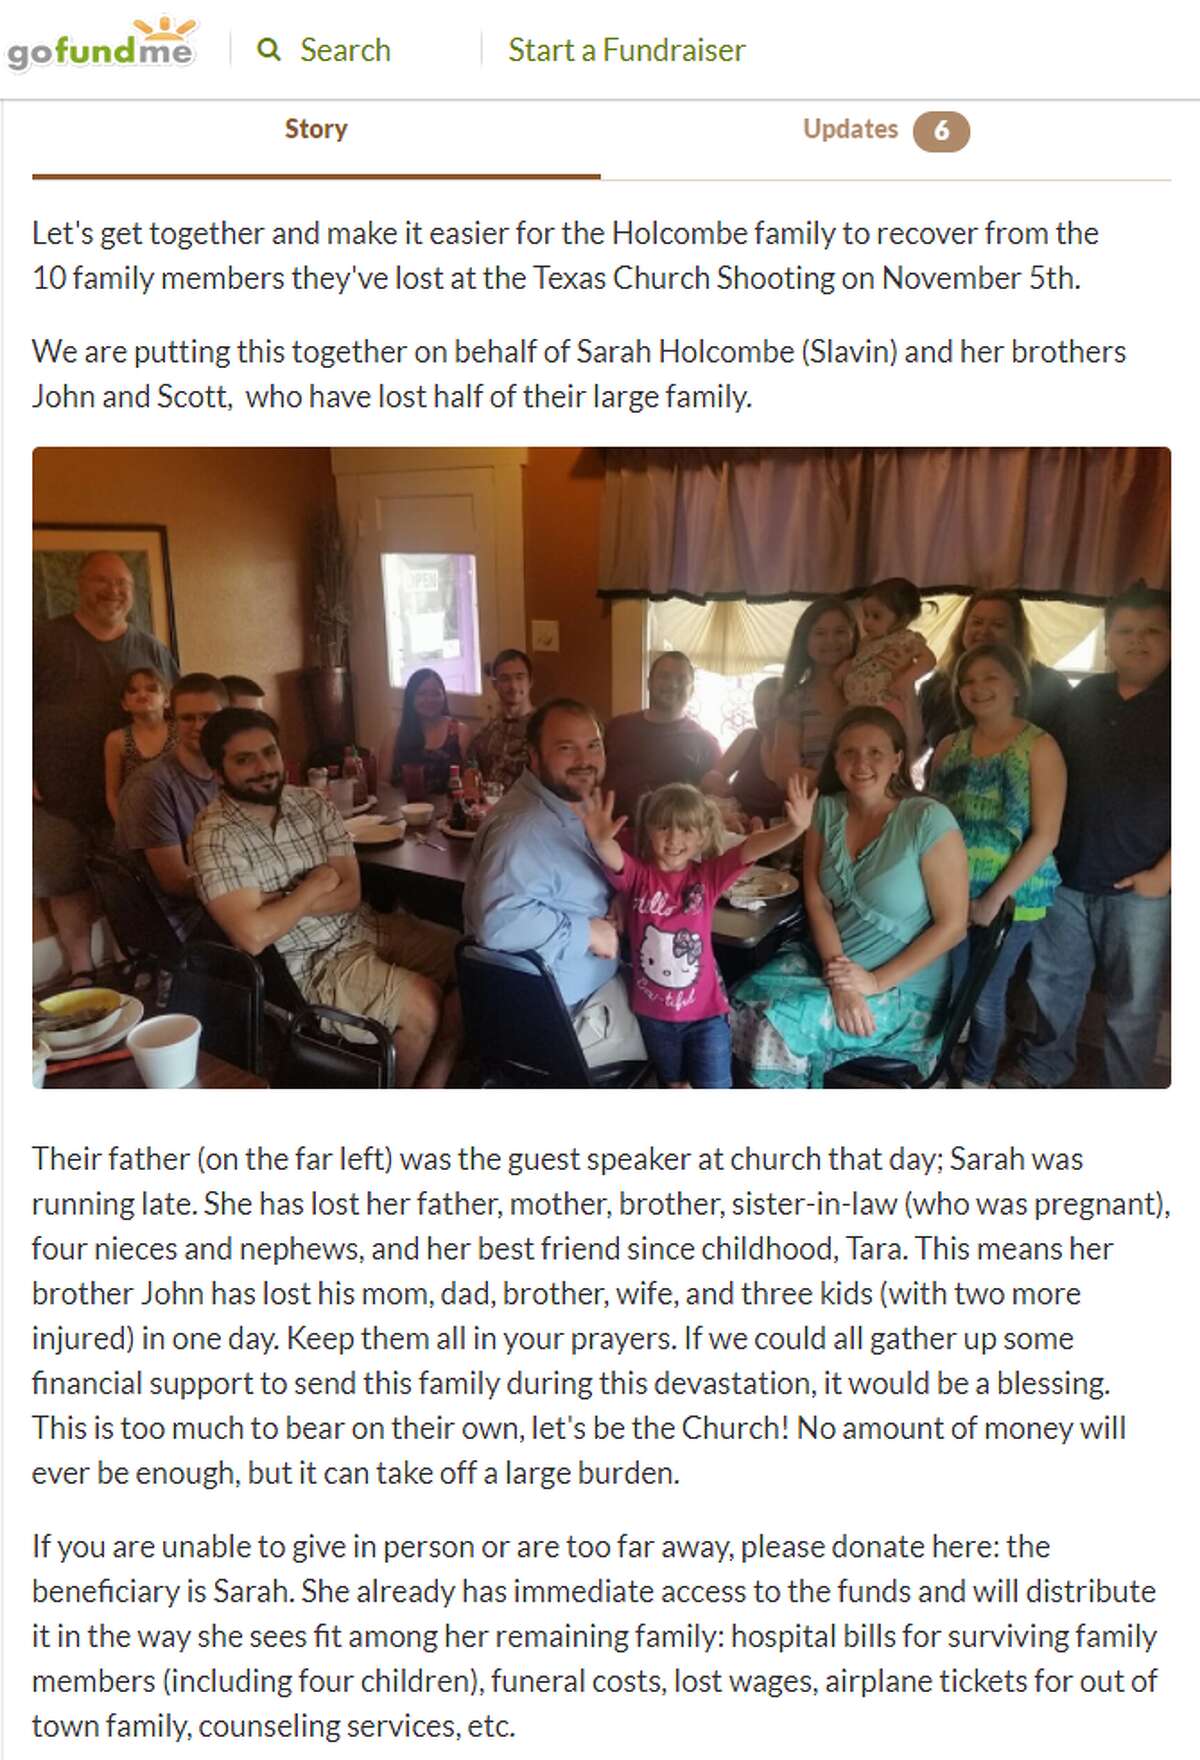 The Holcombe-Hill Family: Bryan Holcombe (60), Karla Holcombe (58), Marc Daniel Holcombe (36), Noah Holcombe (1), Crystal Holcombe (36), Emily, Megan and Greg (GoFundMe, Facebook) Crystal Holcombe, wife of injured John Holcombe, was killed with three of her five children from an earlier marriage: Emily, Megan and Greg. Her unborn child also did not survive. Crystal was a "loving mother and wonderful-hearted woman," her first father-in-law John Hill said. Bryan Holcombe, who filled in for Pastor Frank Pomeroy, died with his wife Karla. They were described as "happy people who never had a negative thing to say" by their friend, Jim Miller. Their son Marc Daniel Holcombe died with the his year-old daughter, Noah, the youngest victim. Read more about the Holcombes: Eight members of one family killed in massacre at Baptist church